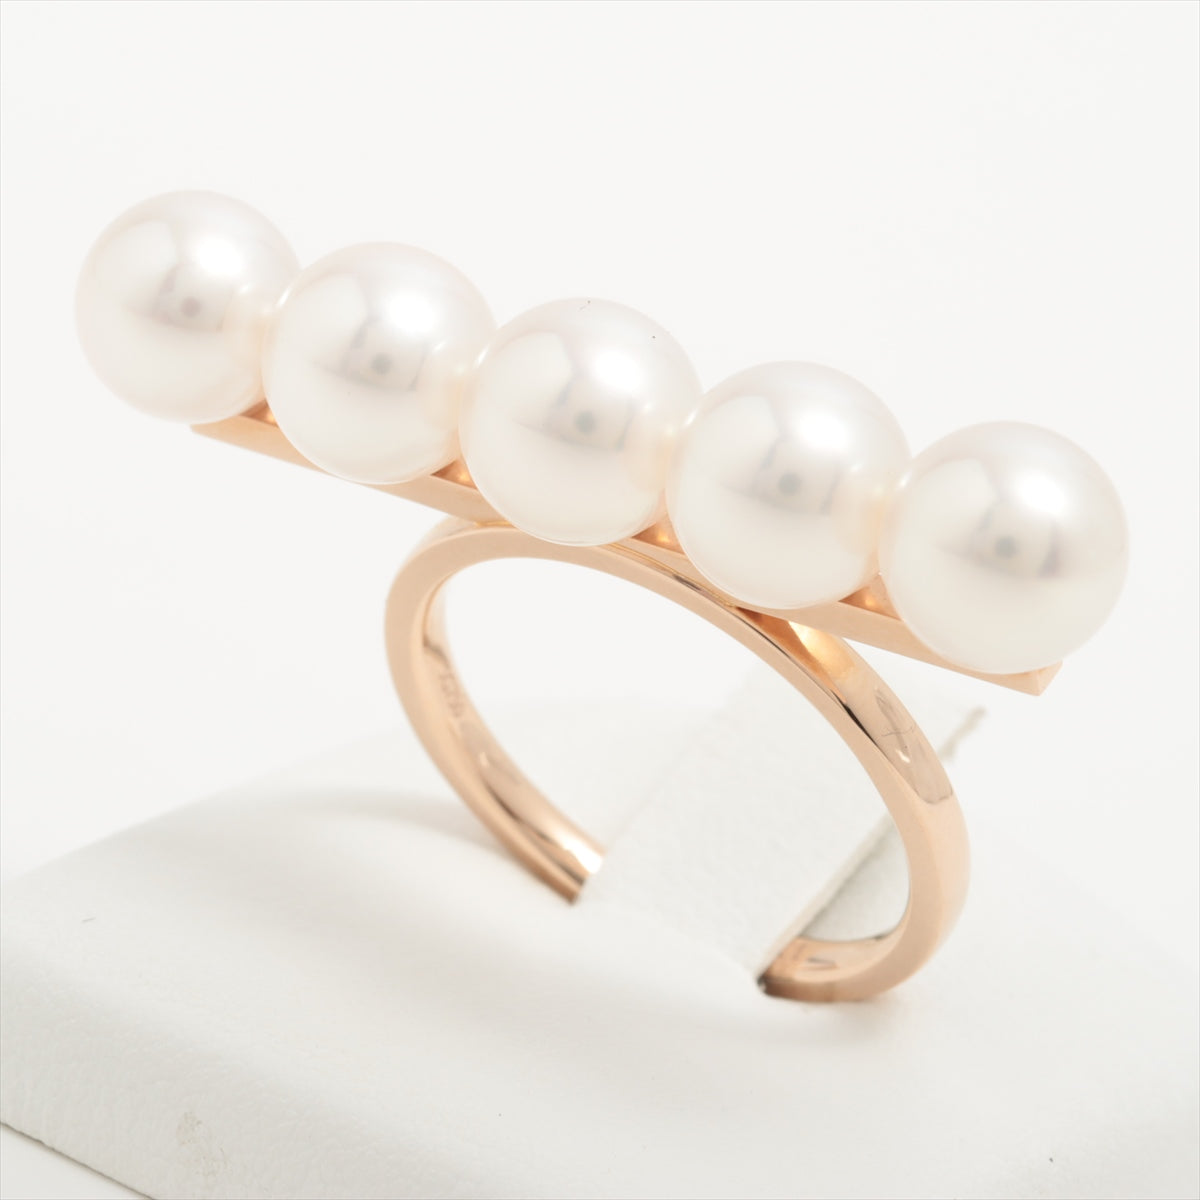 TASAKI Balance Signature Pearl Ring 750(PG) 9.6g Approx. 8.0 to 8.5 mm R4398